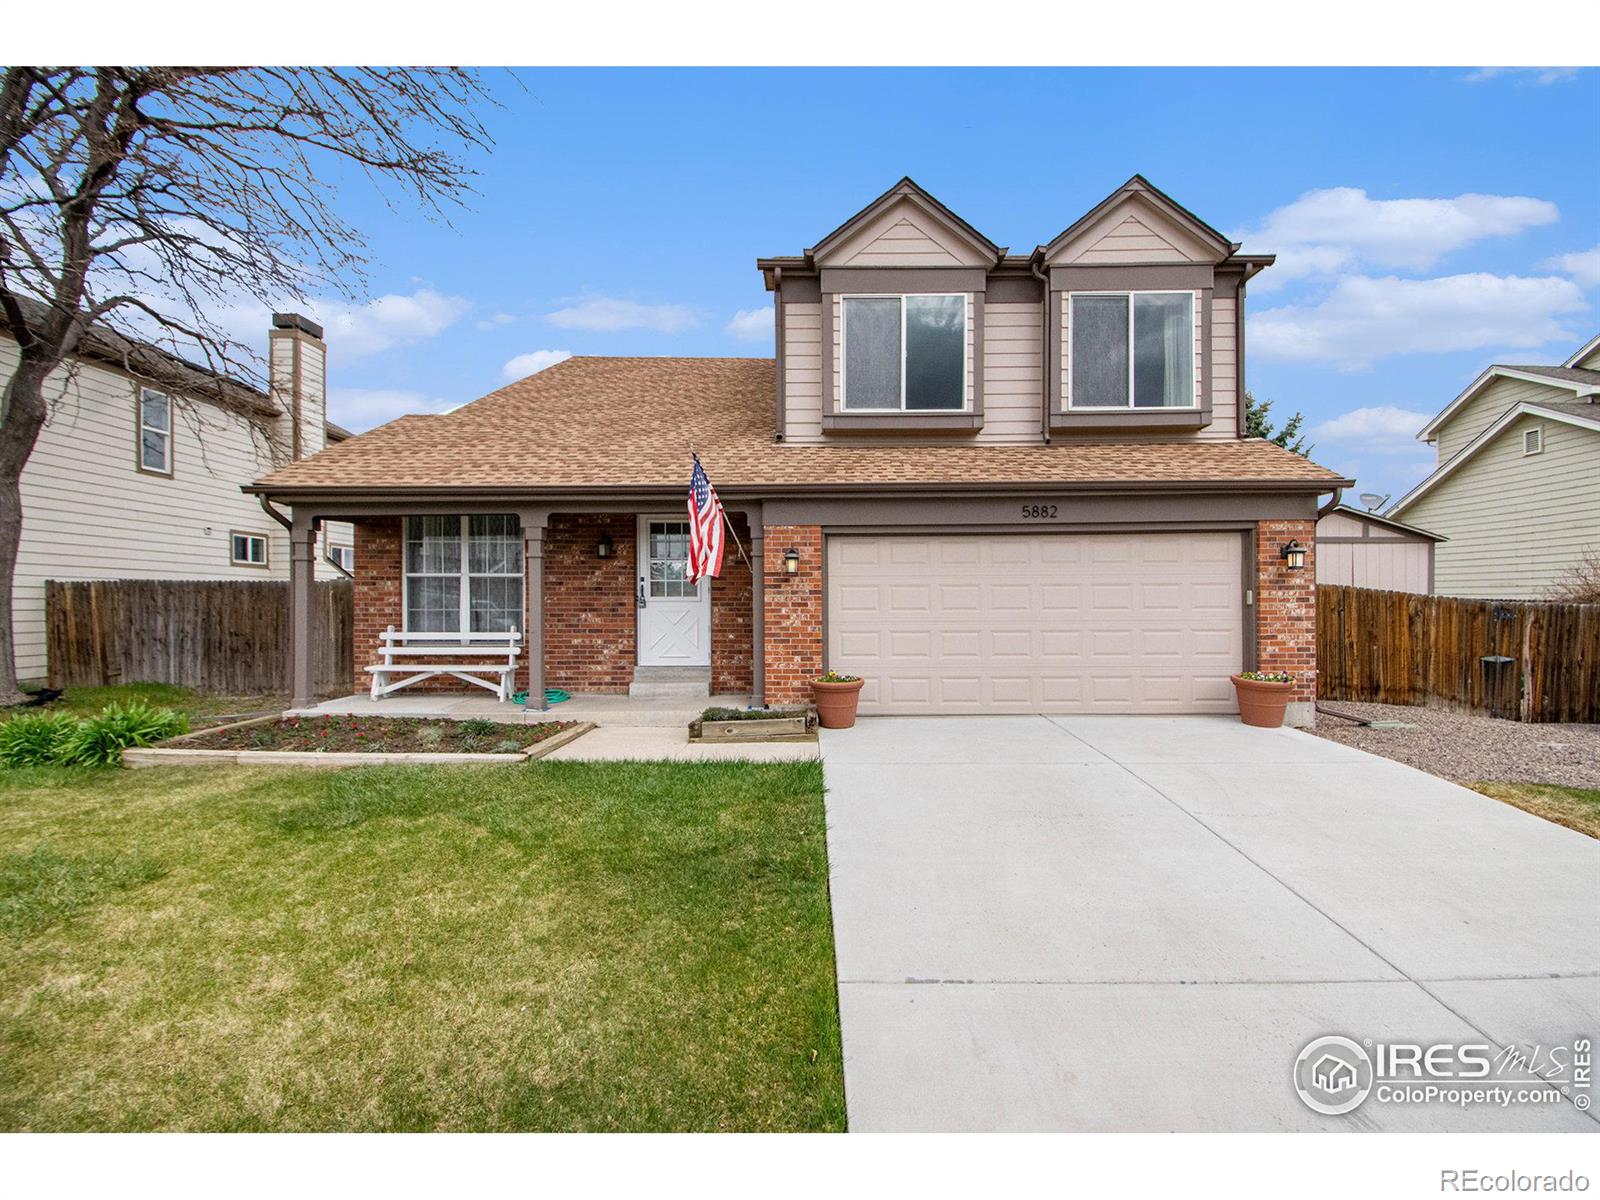 5882 s quatar circle, Centennial sold home. Closed on 2024-05-10 for $543,000.